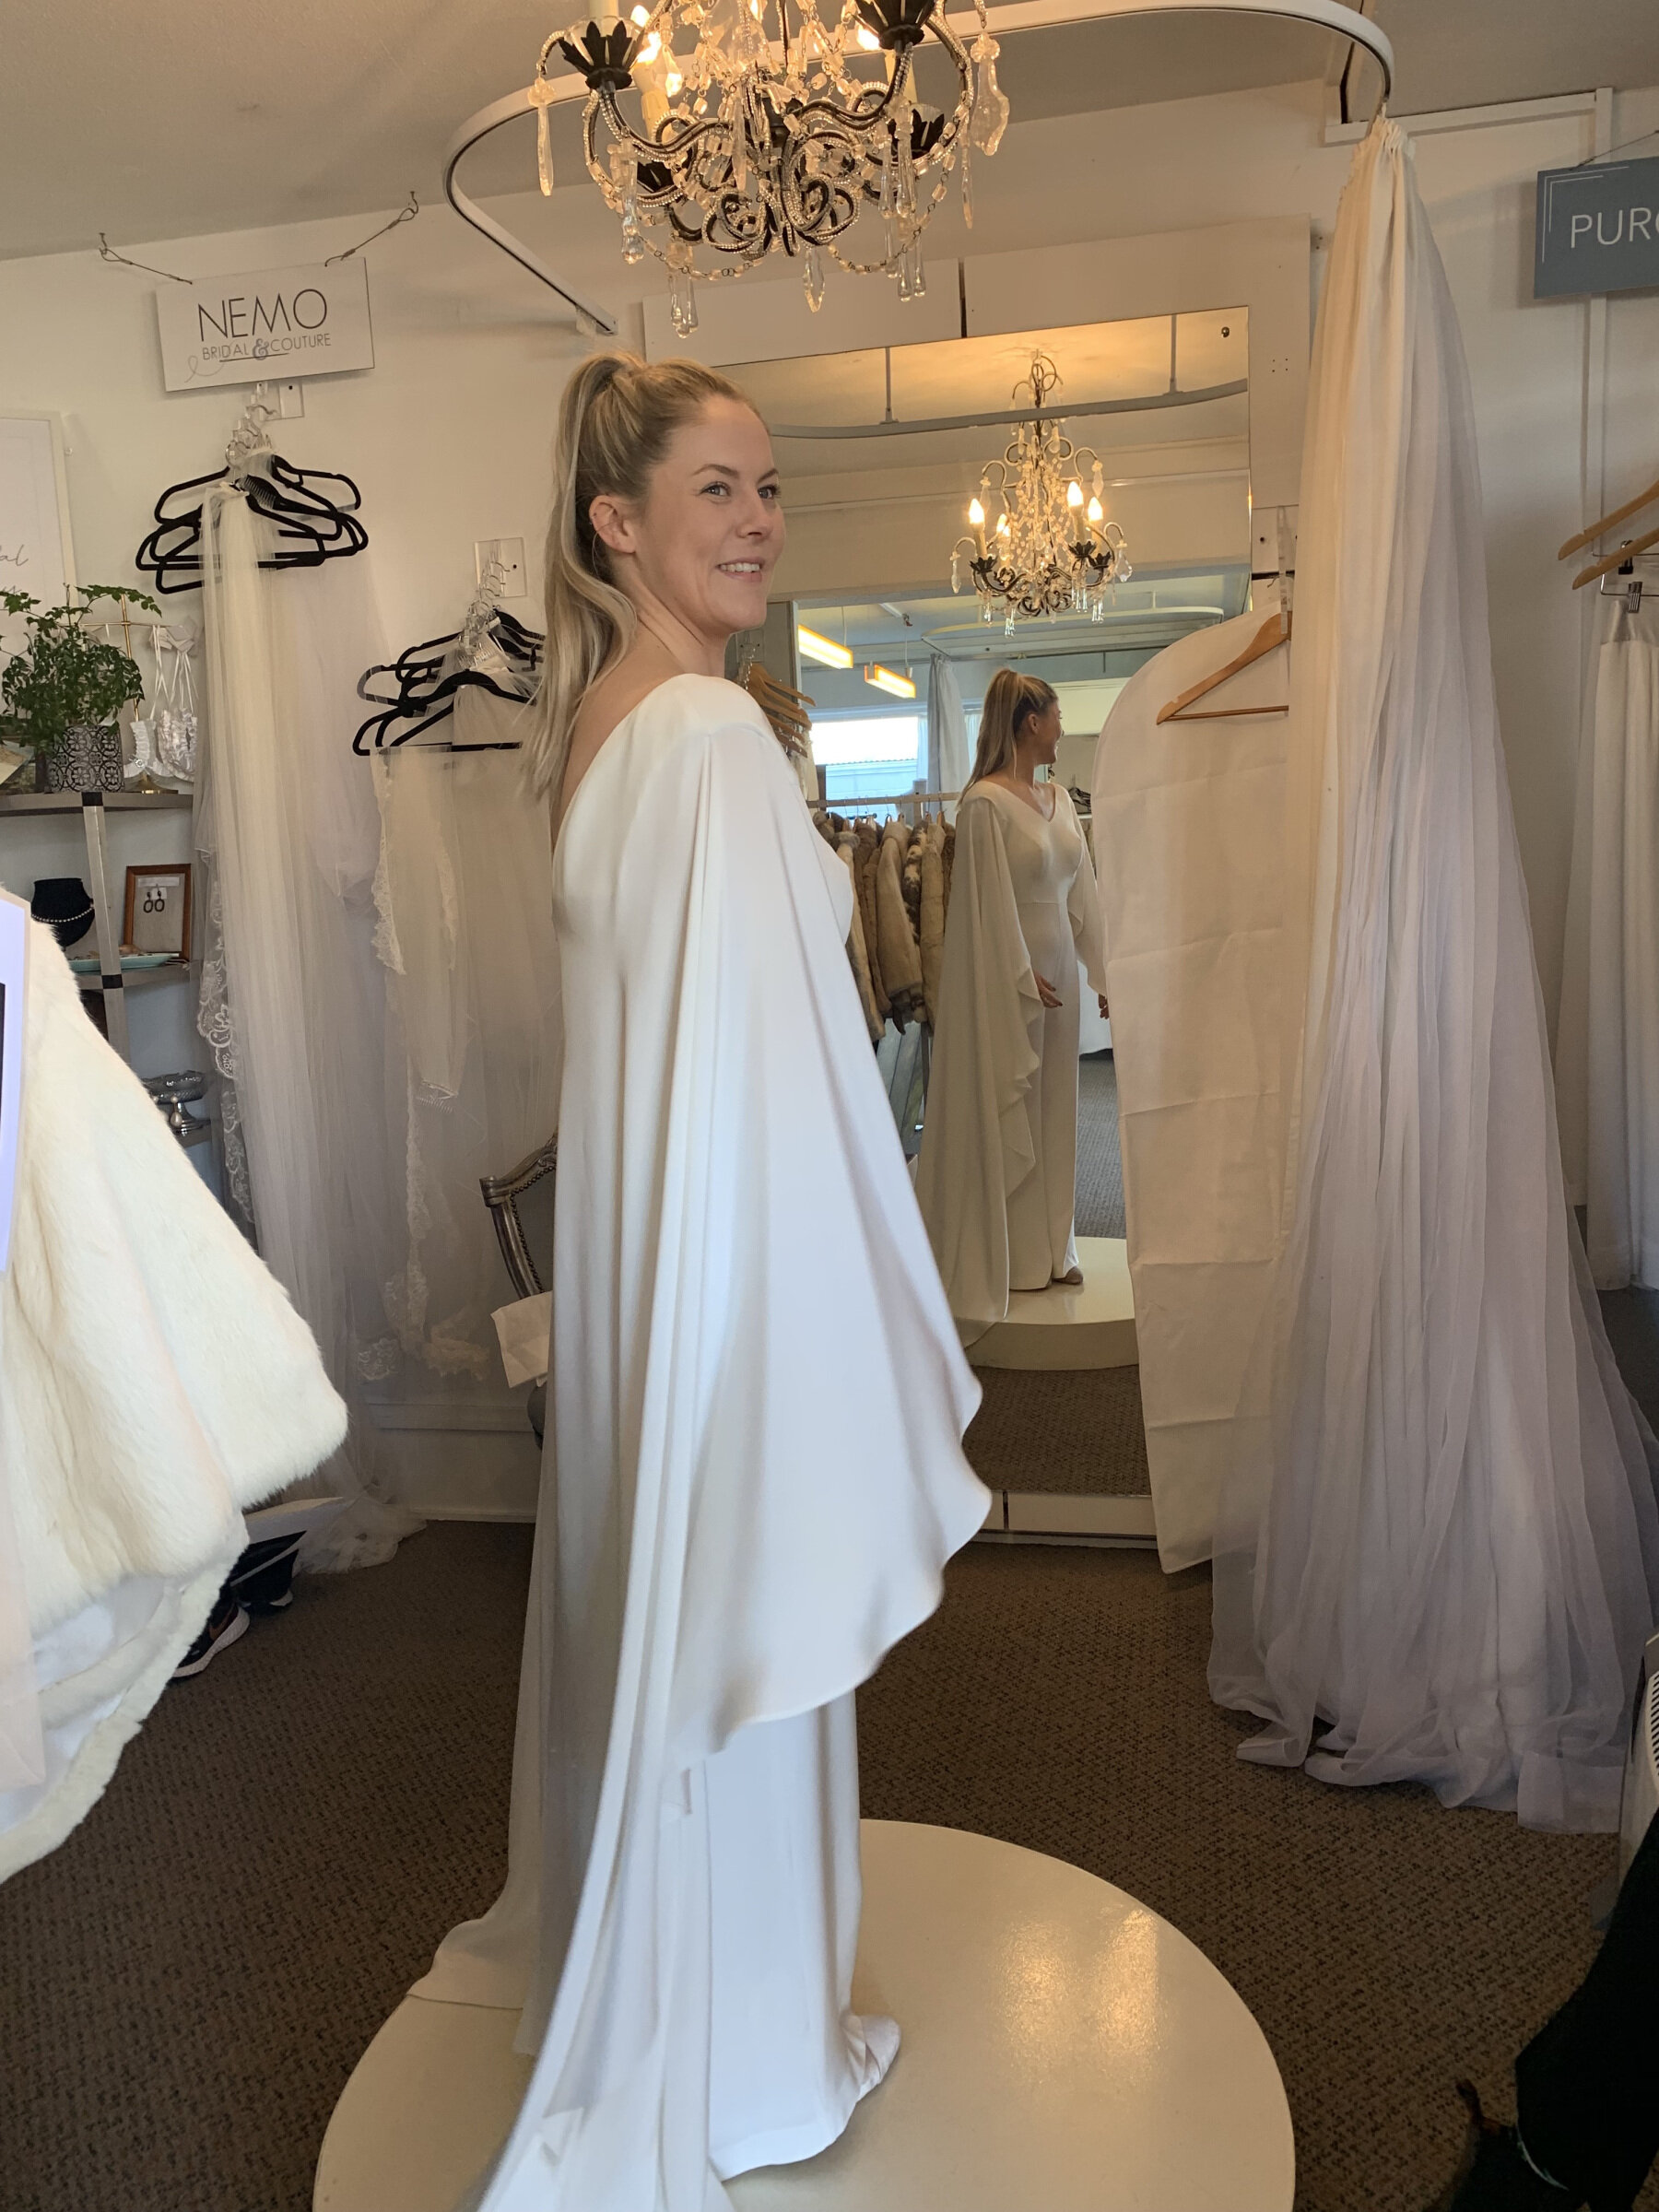  Click to read about influencer Sophie Piearcey’s experience creating her dream 'dress’ completely bespoke with Nemo.  